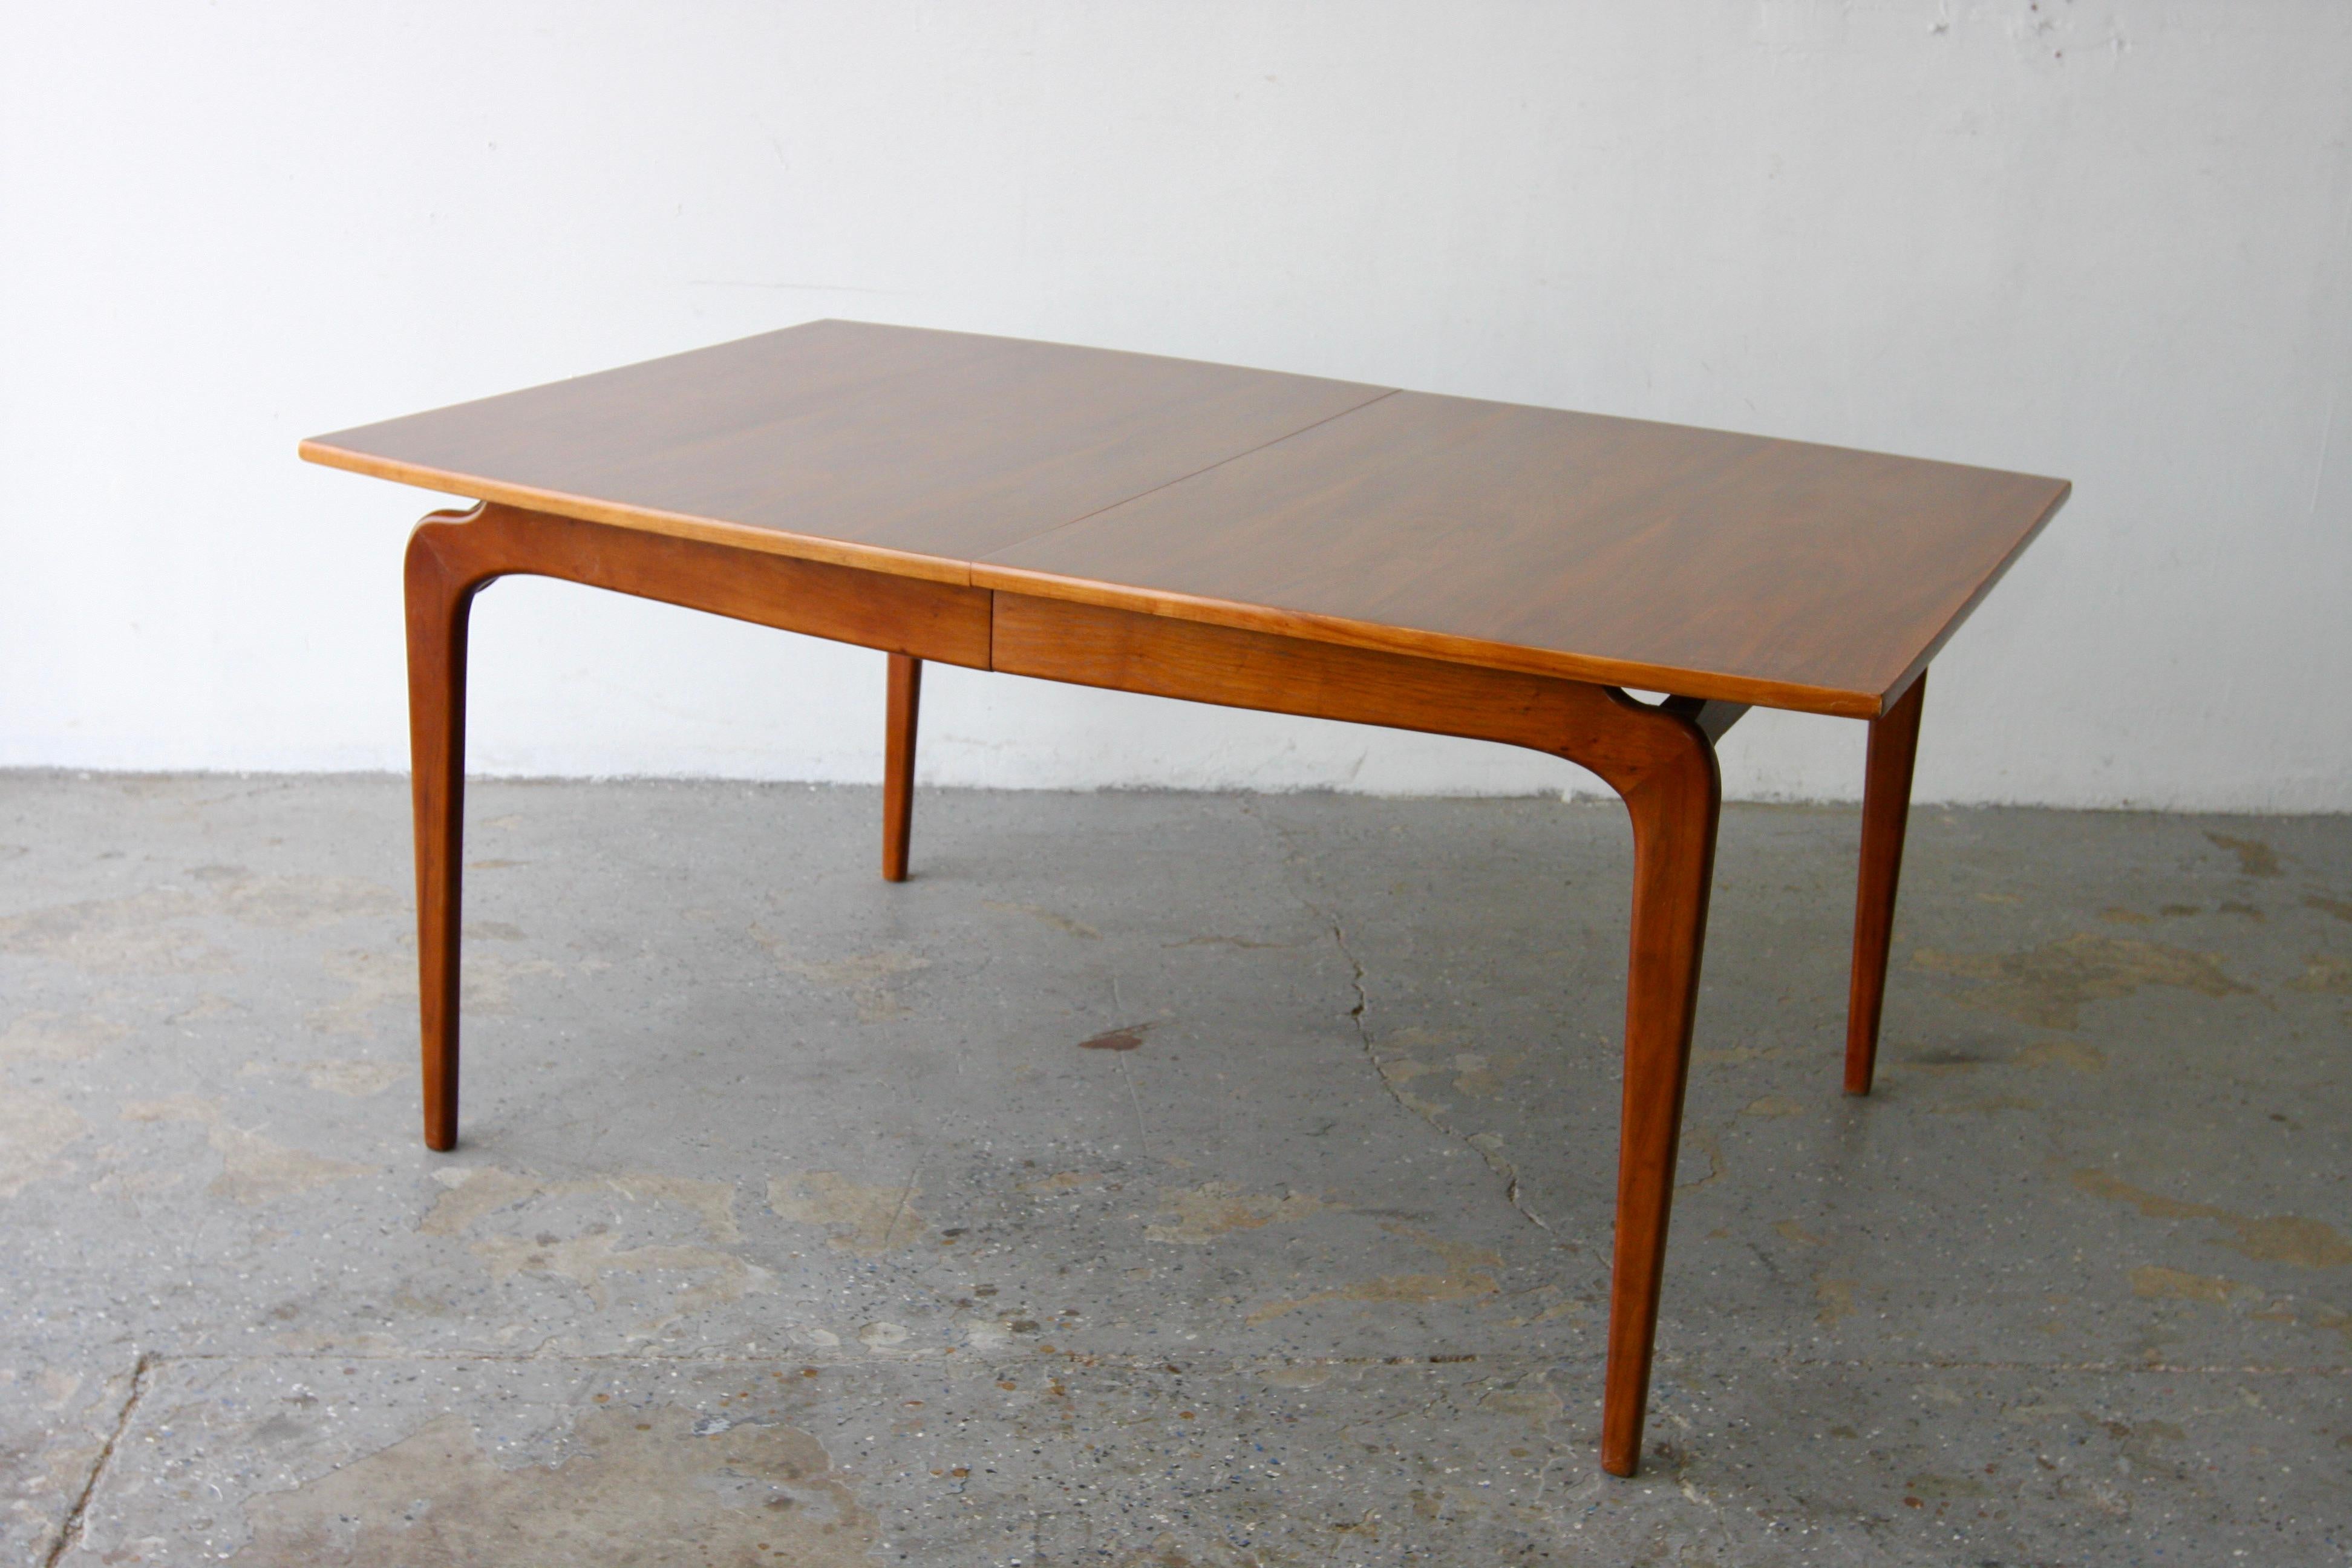 Mid Century Modern Lane Furniture Perception Group extension dining table Walnut  Model: 57. Walnut dining table from the Perception Group by Lane Furniture. Designed by Warren Church. Lower Sculpted legs are made of solid wood.  

61 in Long 42 in